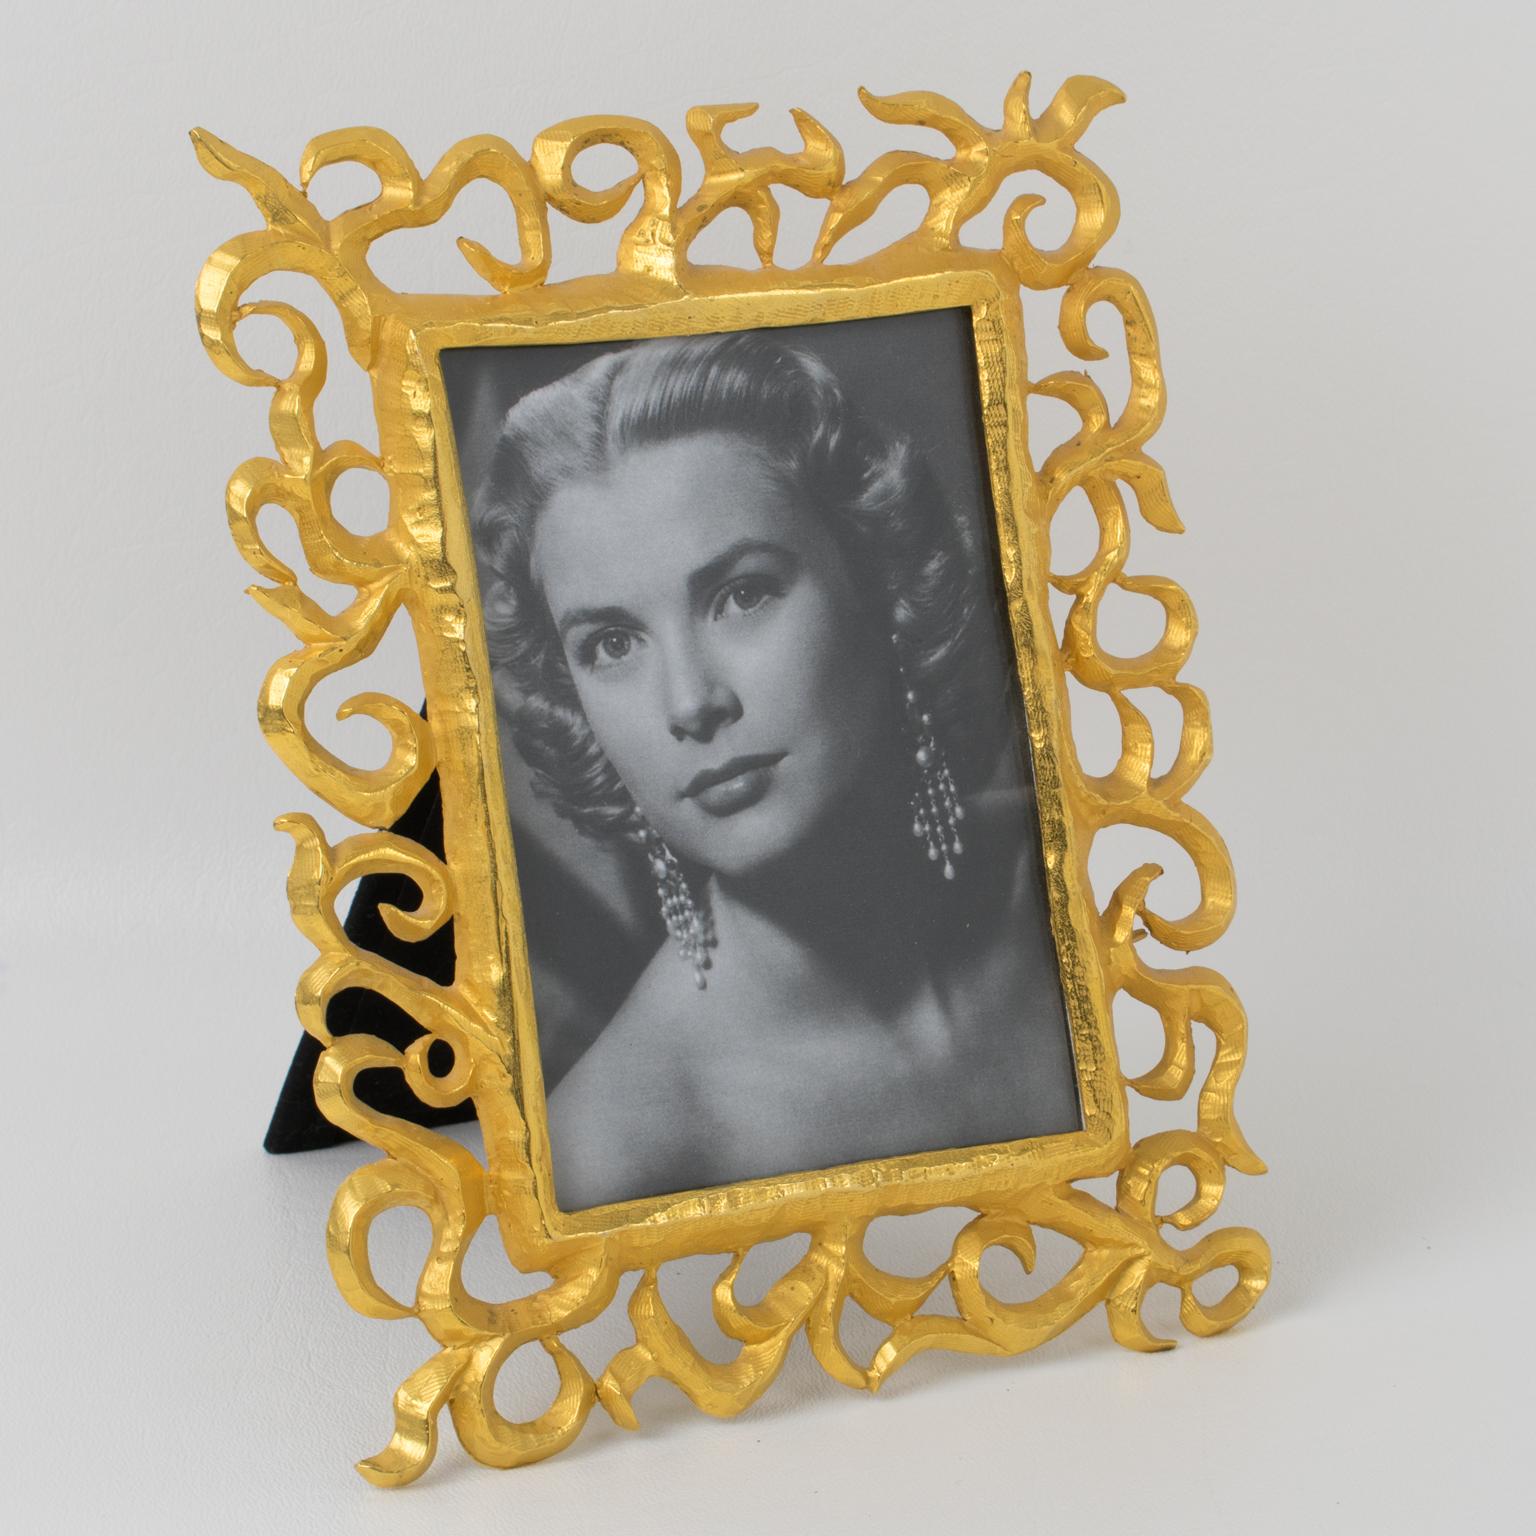 This exquisite gilt metal picture photo frame by French designer Edouard Rambaud is the perfect accessory to showcase your treasured memories. Crafted in the 1990s, this elegant frame is built from brushed gilded metal with carved detailing and